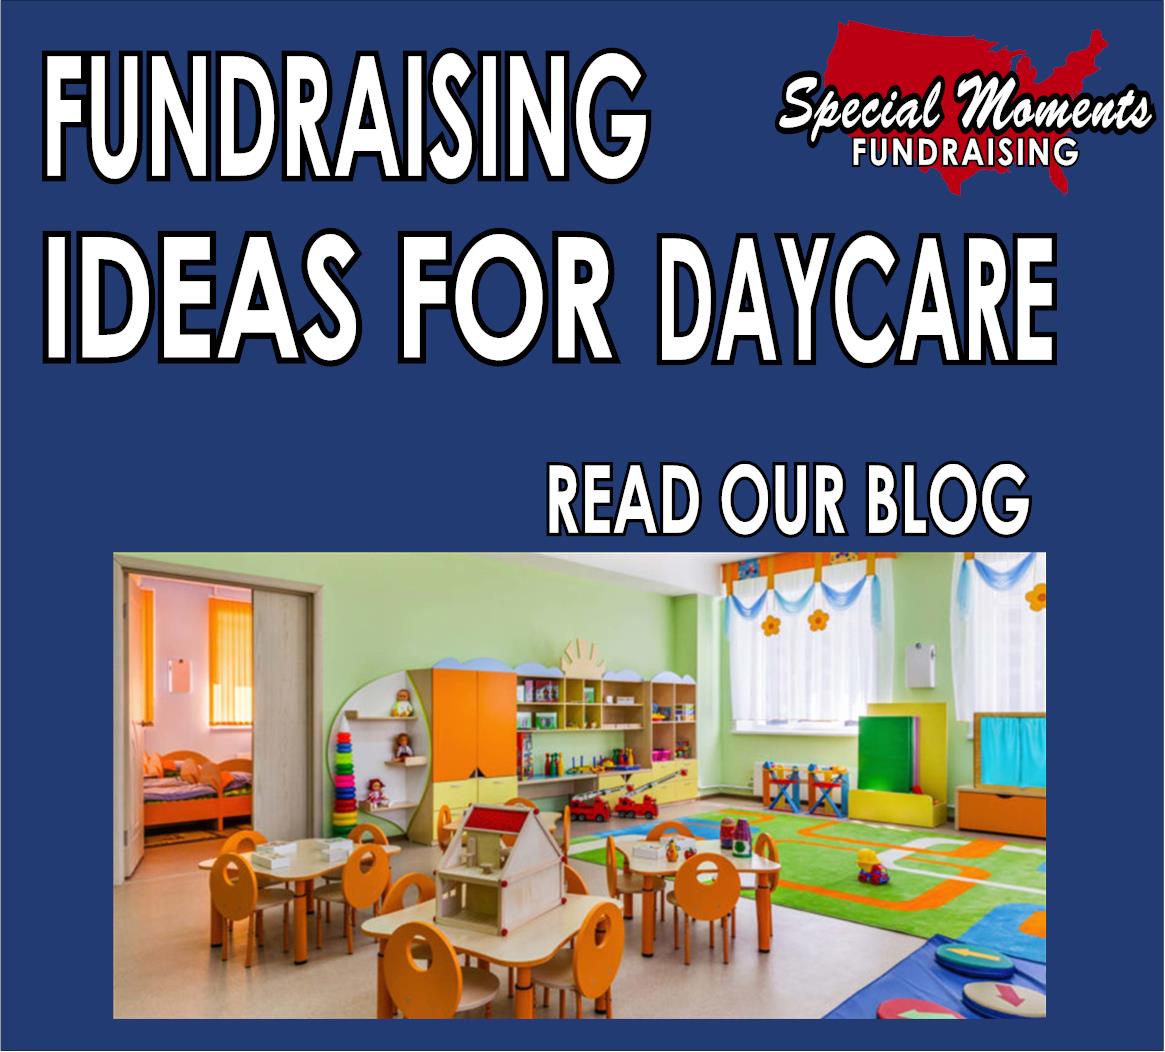 Fundraising Ideas for Daycare